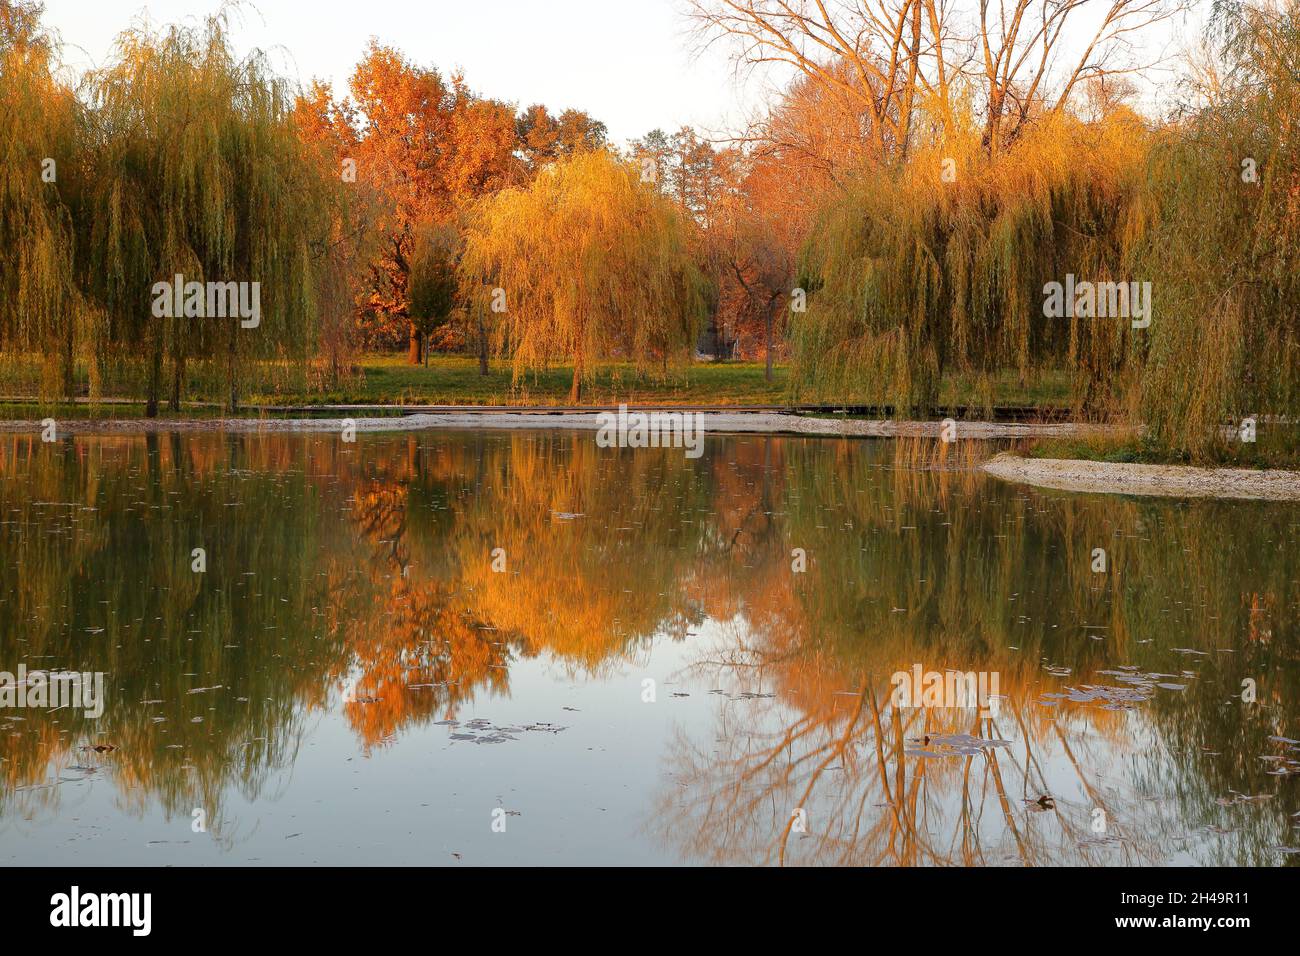 Park in autumnal colours, trees reflected in pond water Stock Photo